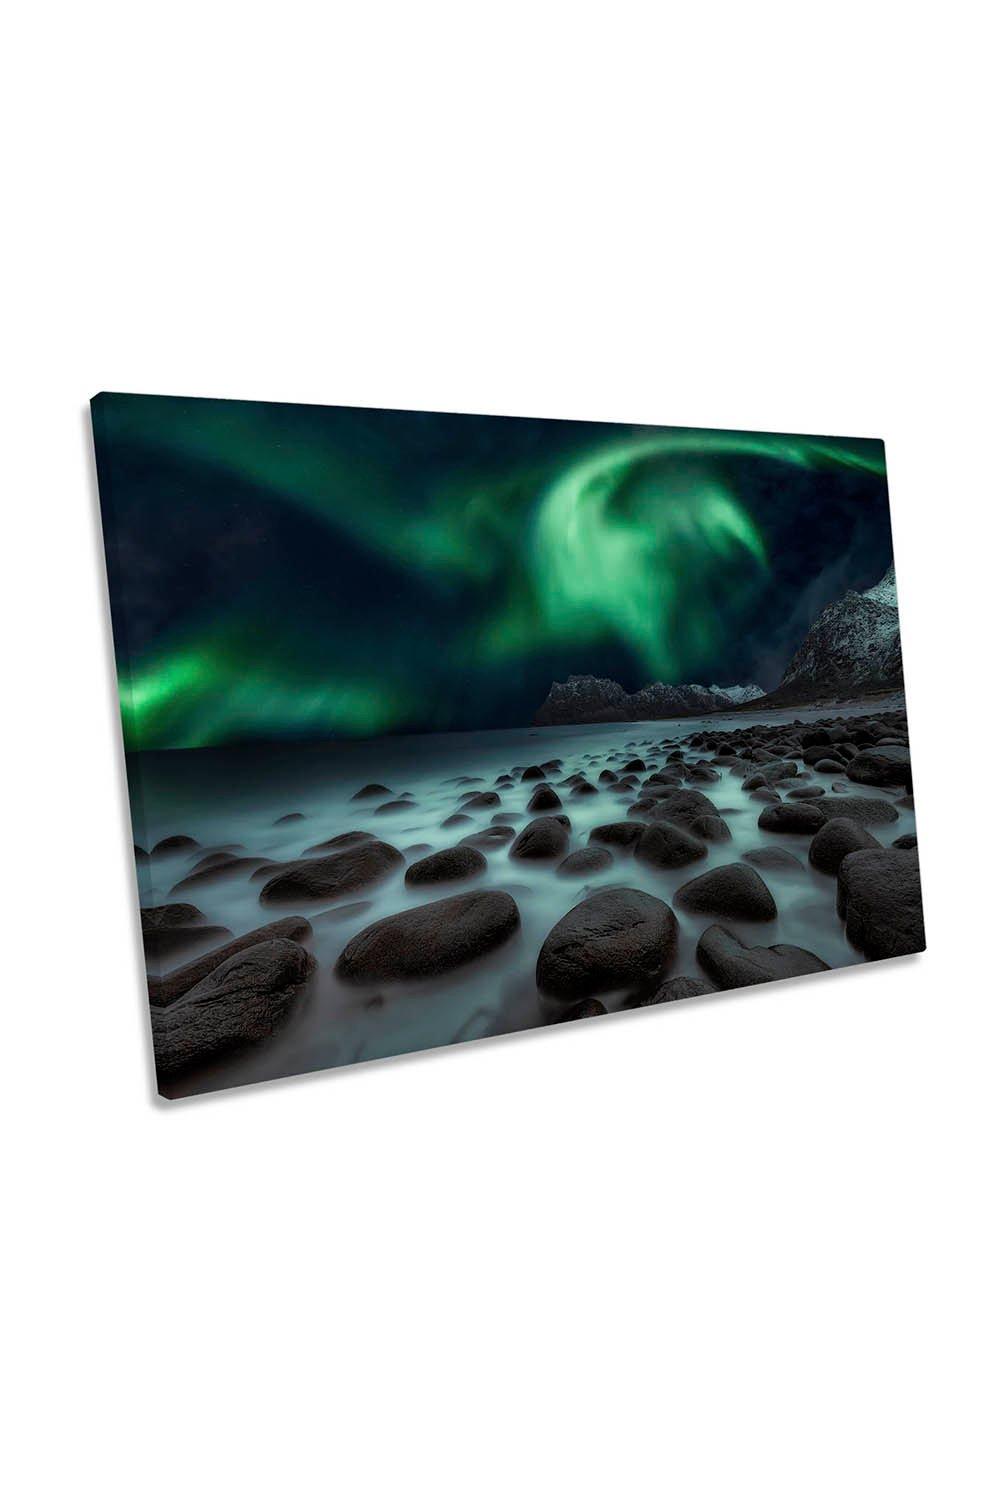 Dragon's Fly Northern Lights Green Canvas Wall Art Picture Print